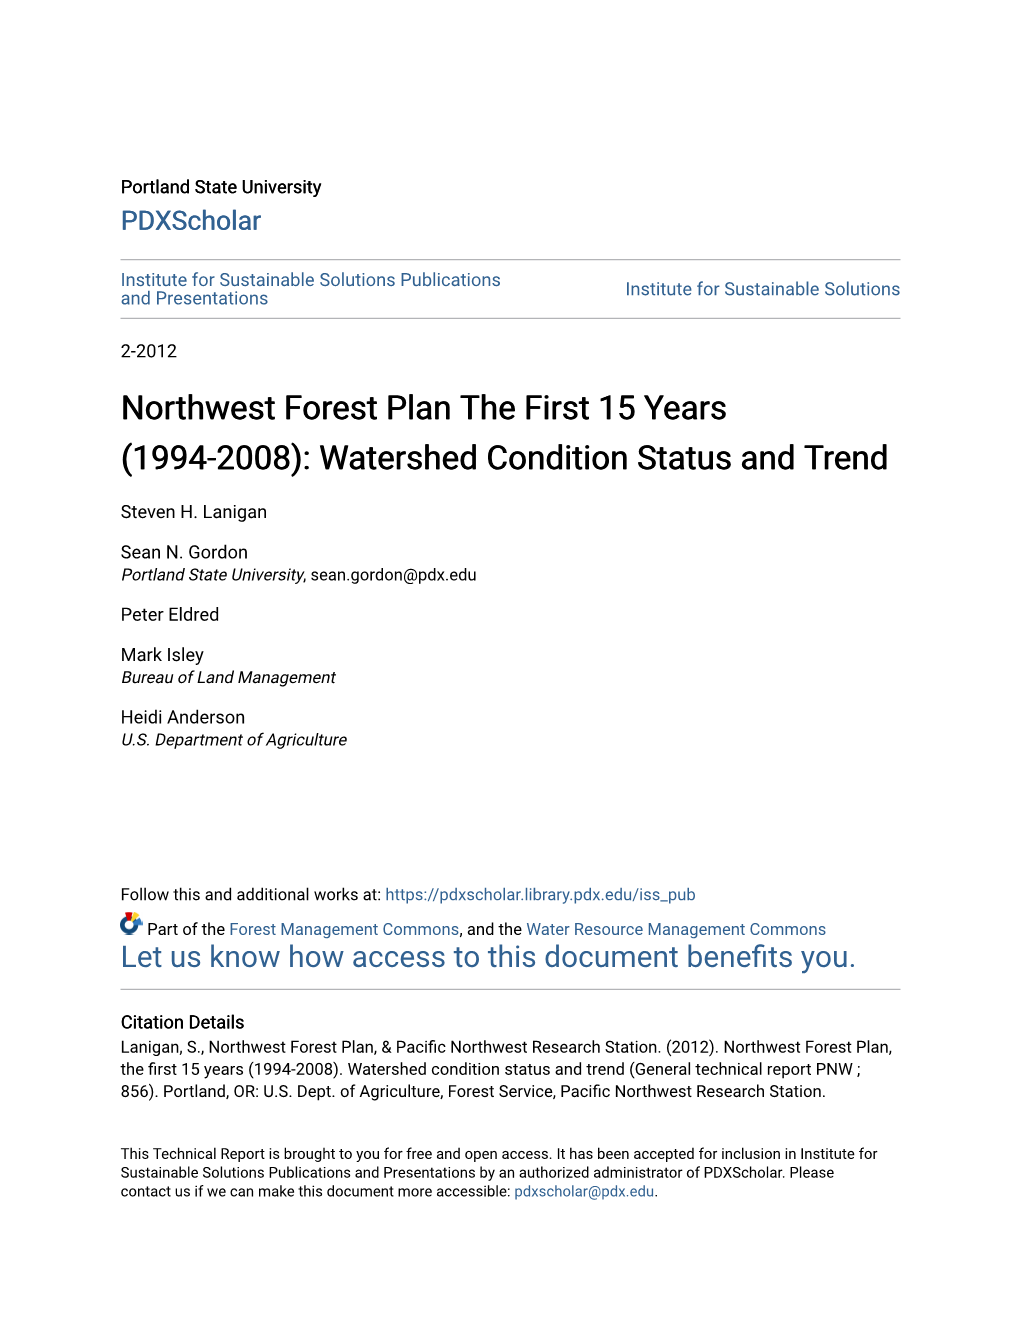 Northwest Forest Plan the First 15 Years (1994-2008): Watershed Condition Status and Trend